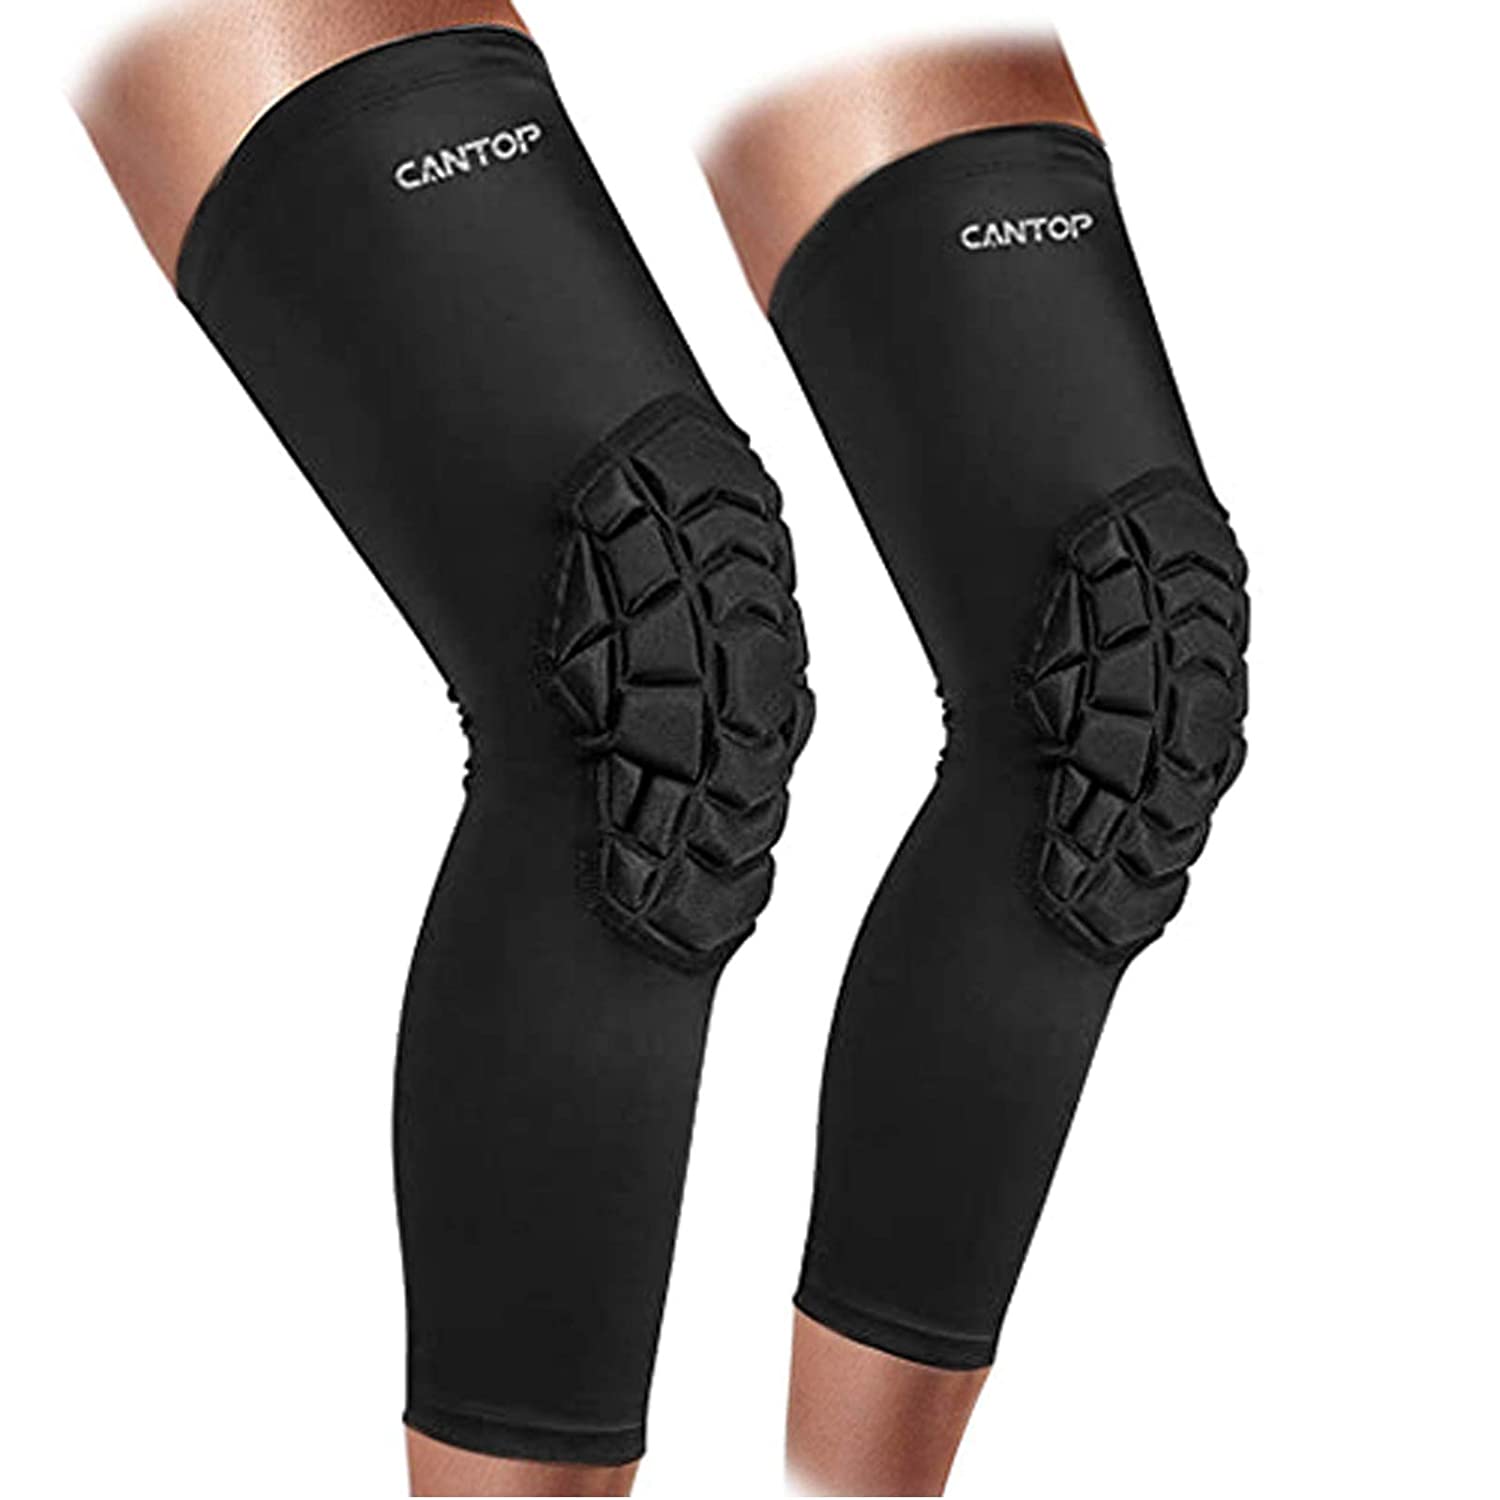 Cantop Compression Knee Pads